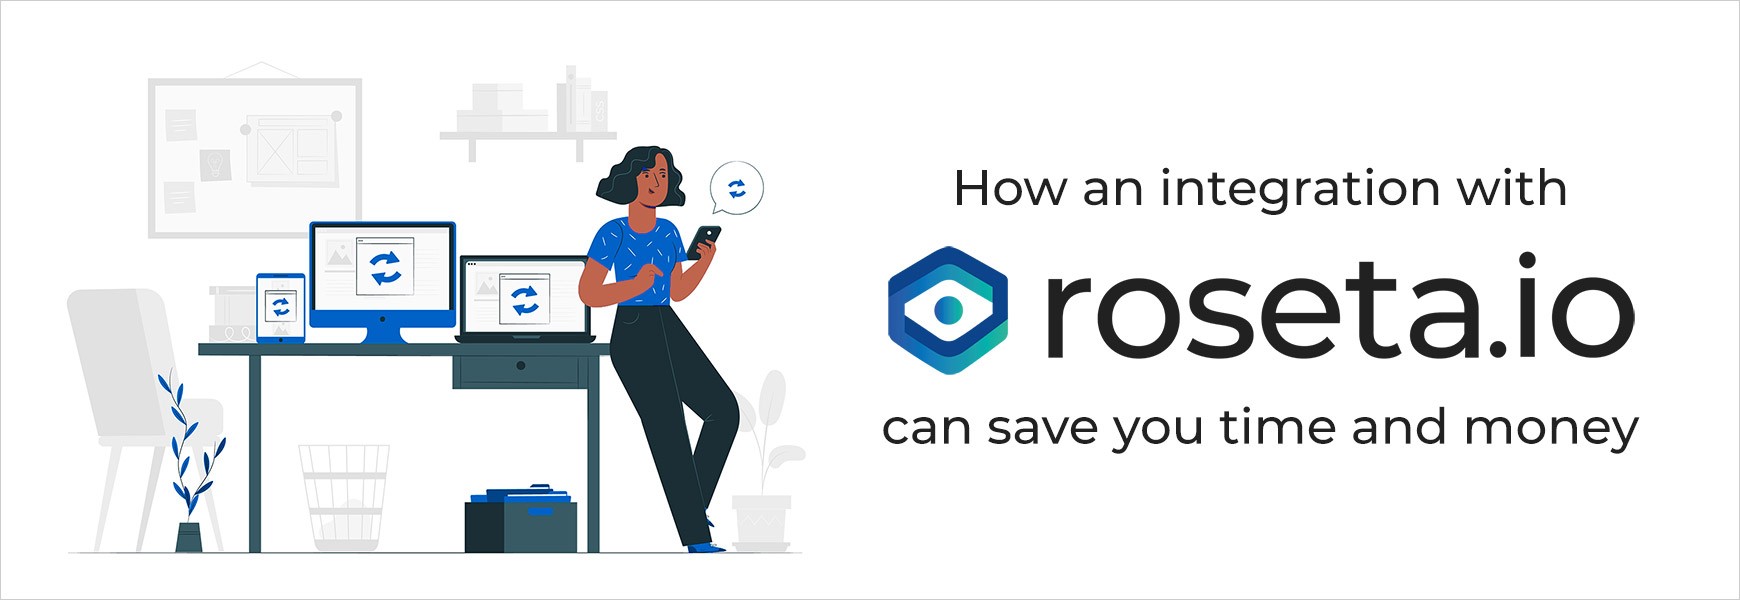 How an integration with roseta.io can save you time and money